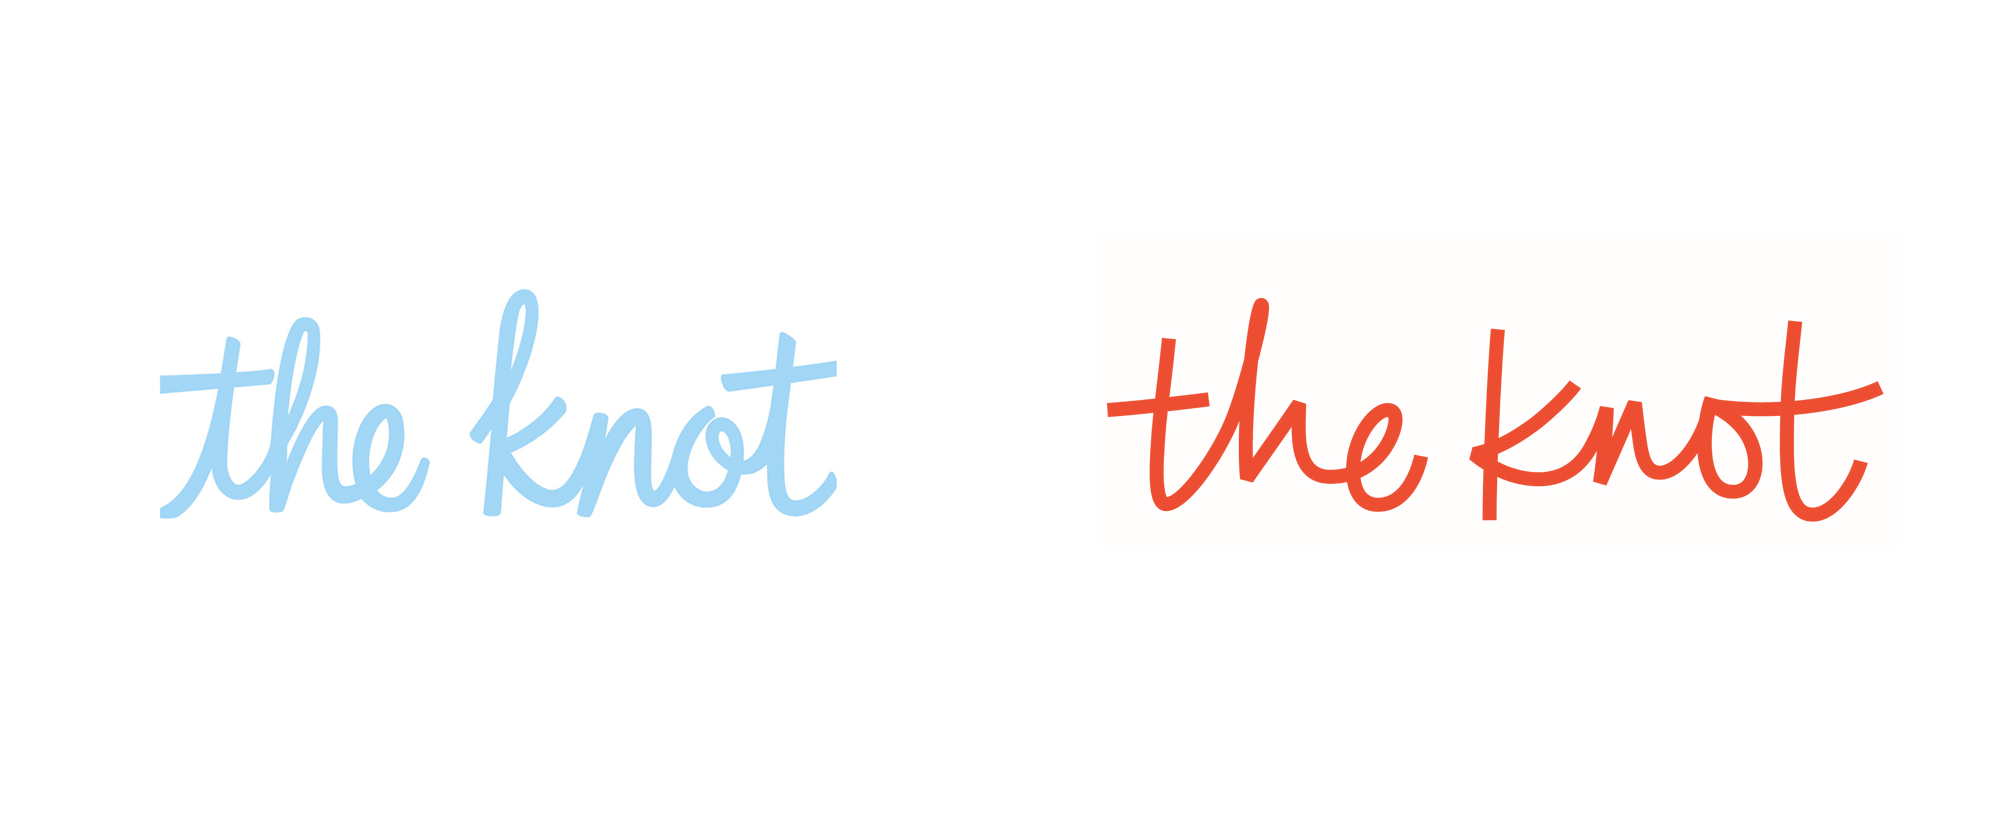 Theknot.com Logo - Brand New: New Logo and Identity for The Knot